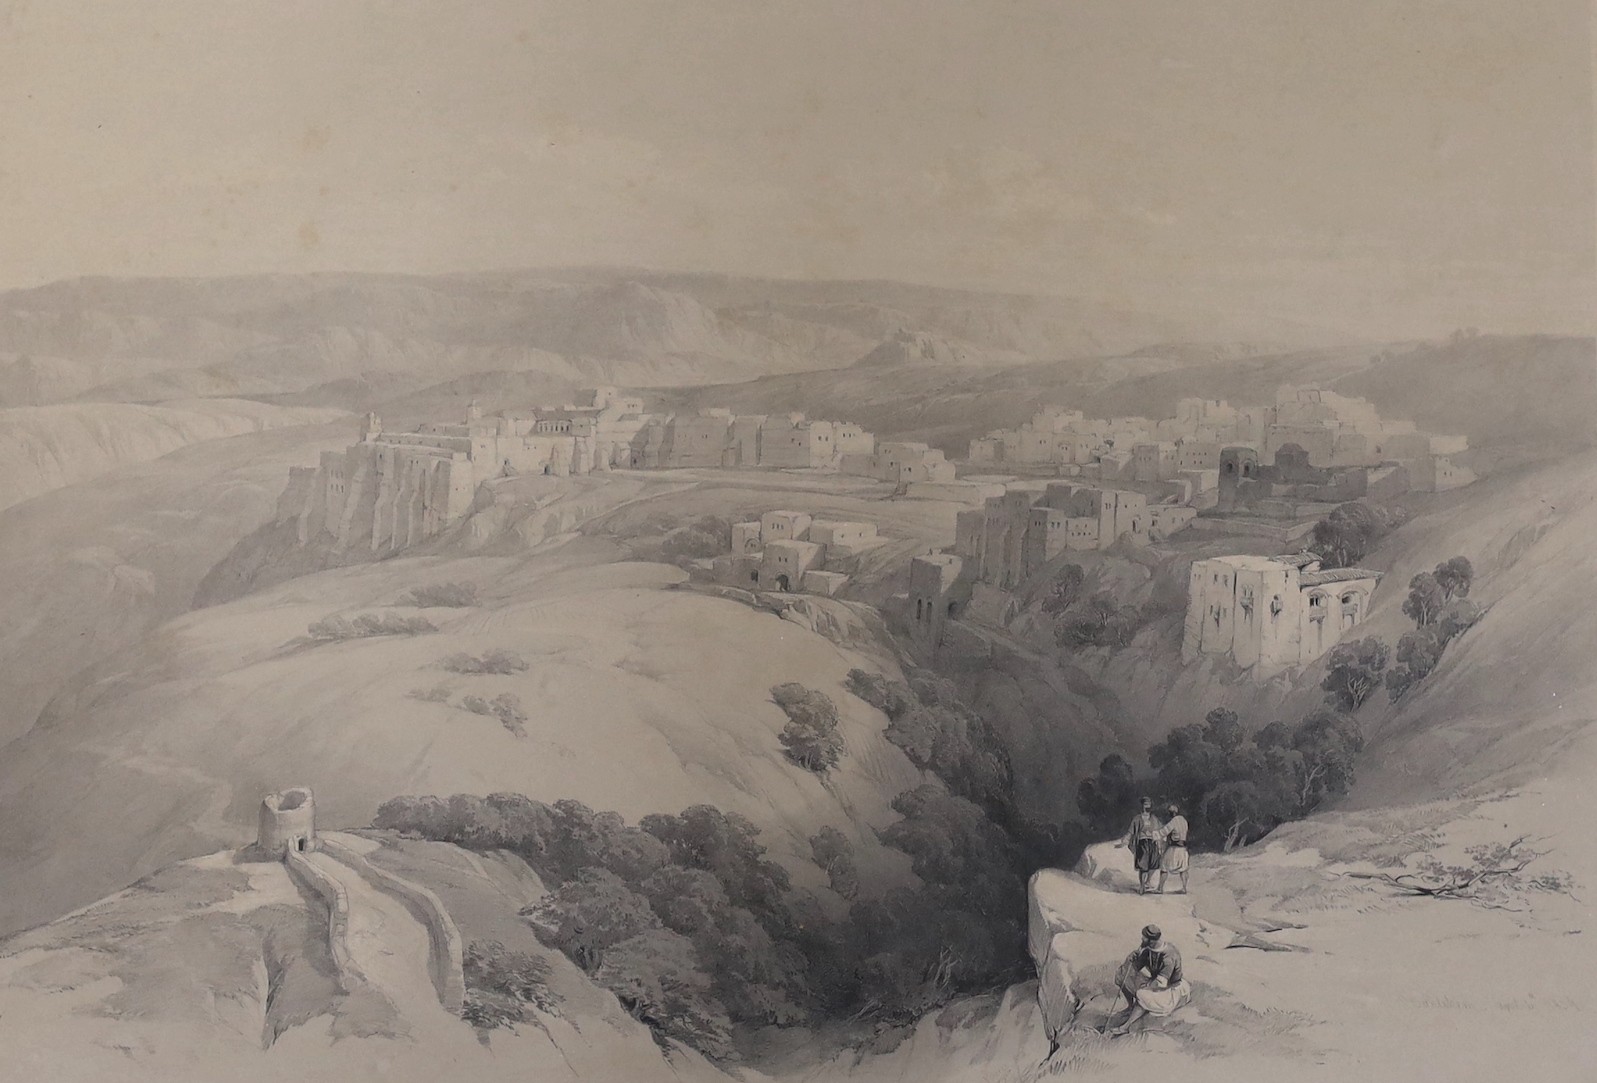 David Roberts (1796-1864), hand coloured lithograph, 'Descent into the Valley of the Jordan', 1839, plate 56, overall 36 x 52cm, and an uncoloured View of Bethlehem, 1839, plate 64, overall 36 x 52cm